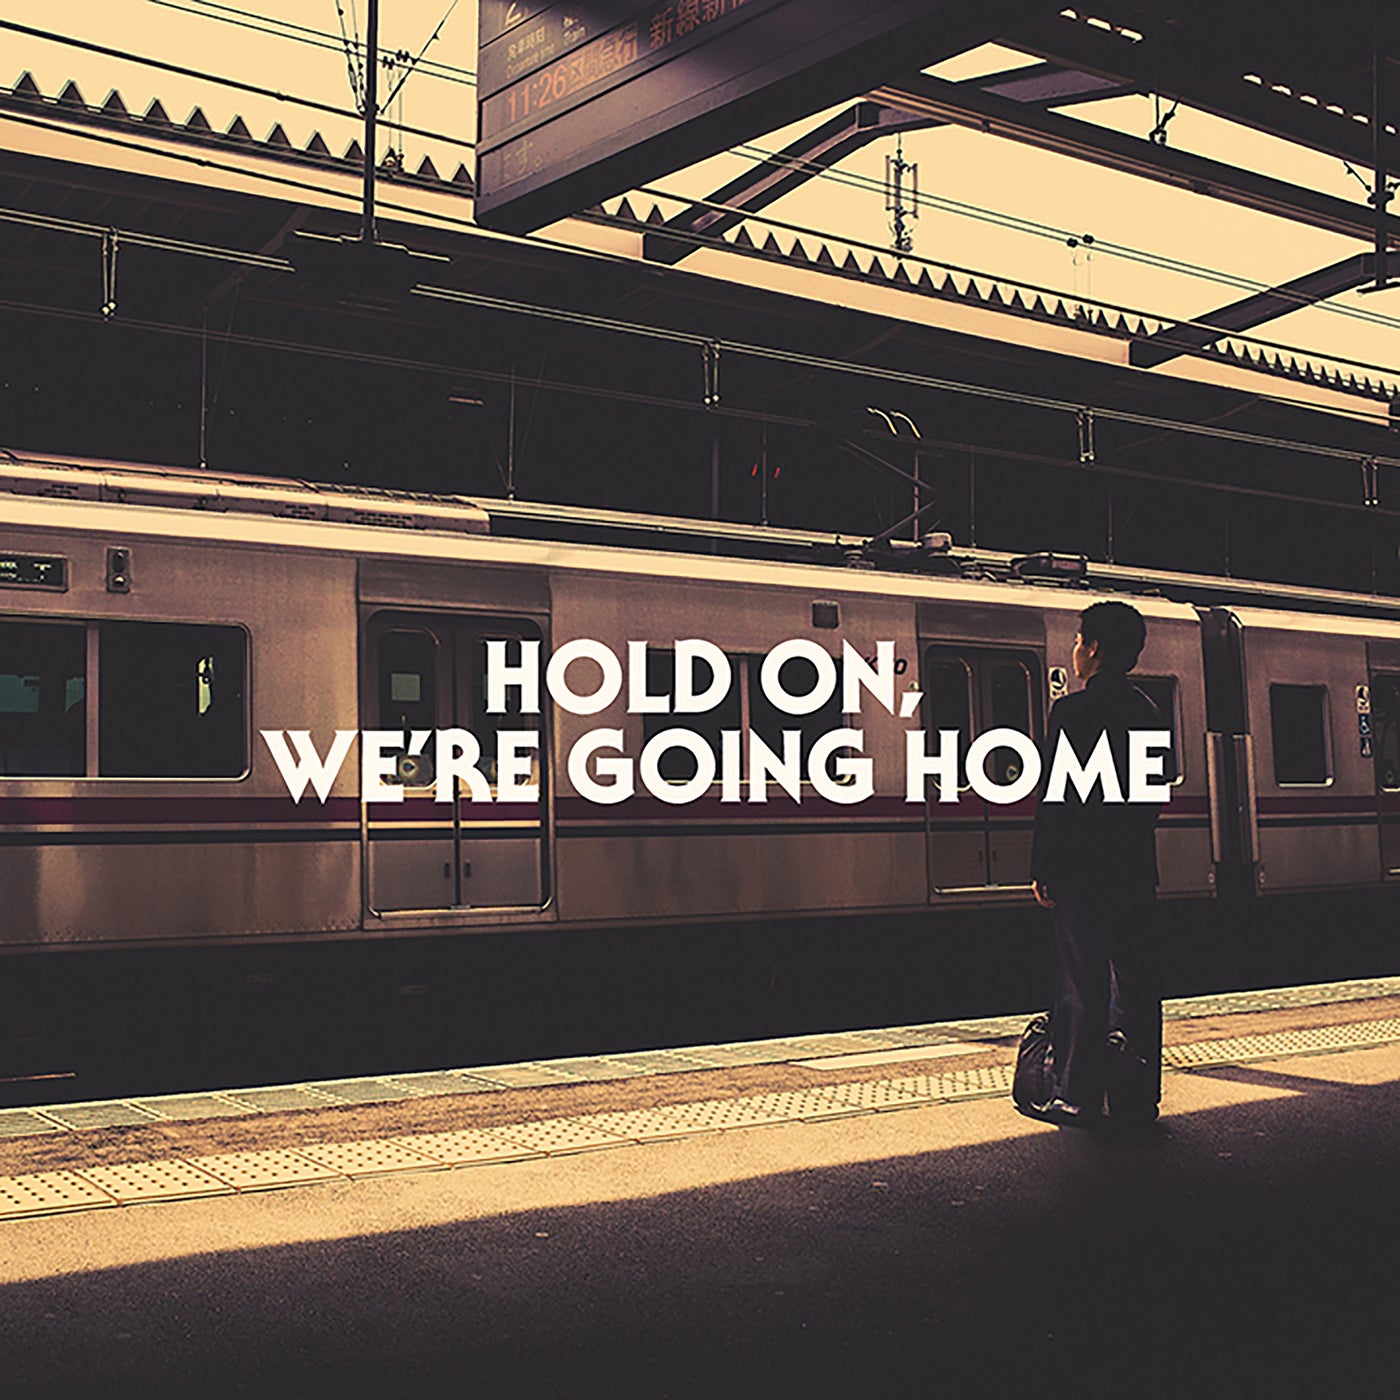 4 never going home. Go Home. Going Home. Hold on we’re going Home. Go Home картинка.